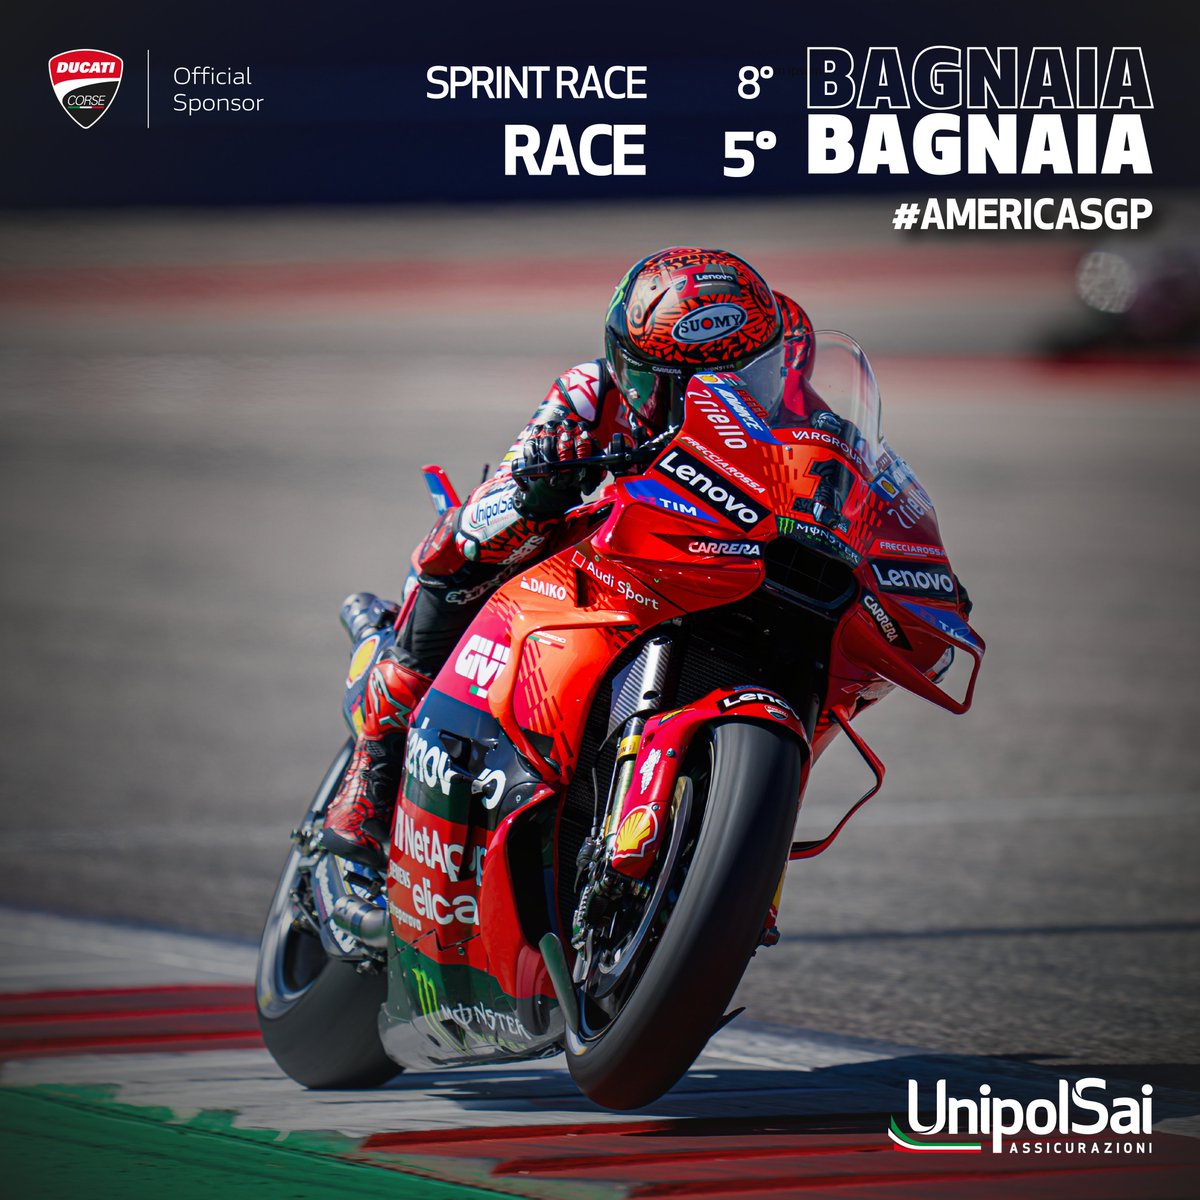 Excellent performance of @Bestia23 in the #AmericasGP! In the 2nd half of the race he bridged the gap with the front runners and scored a 3rd-place finish. 🥉🏁 @PeccoBagnaia was 5th after a good first part of the race. See you at👉#SpanishGP 🇪🇸 Always #ForzaDucati🔴